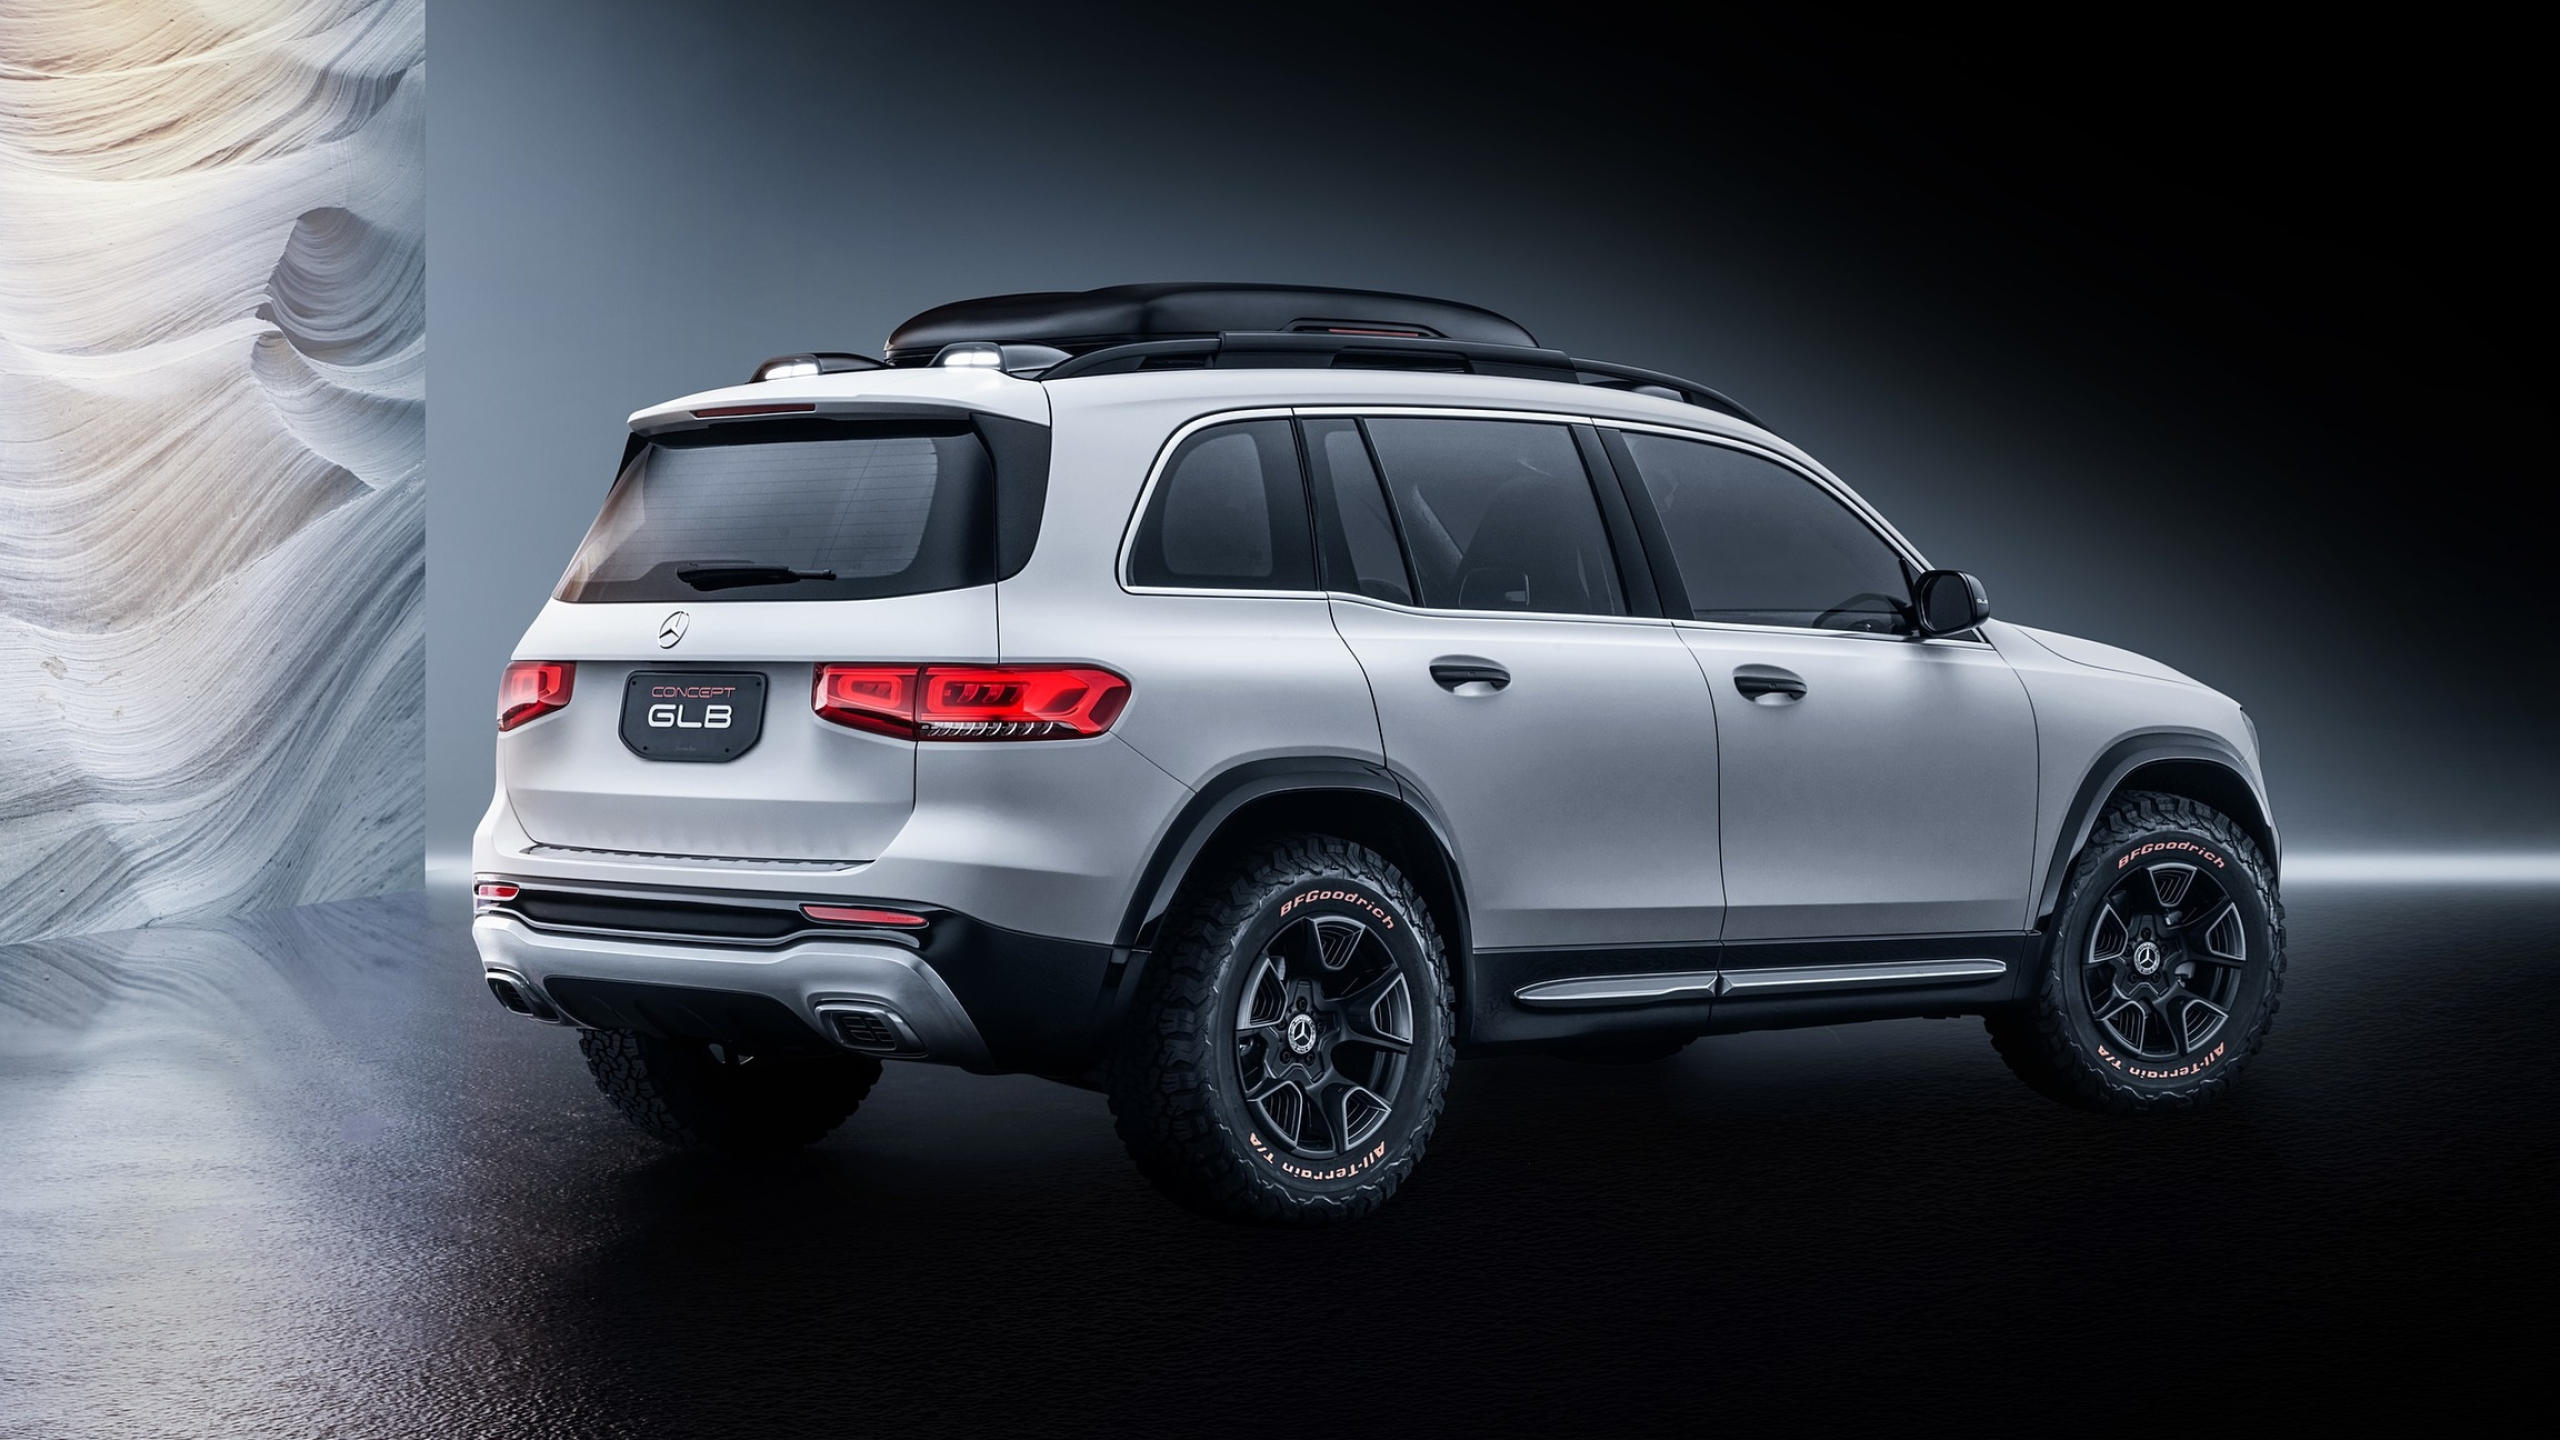 Mercedes-Benz GLB, Compact and versatile, Refined and spacious, Advanced technology, 2560x1440 HD Desktop